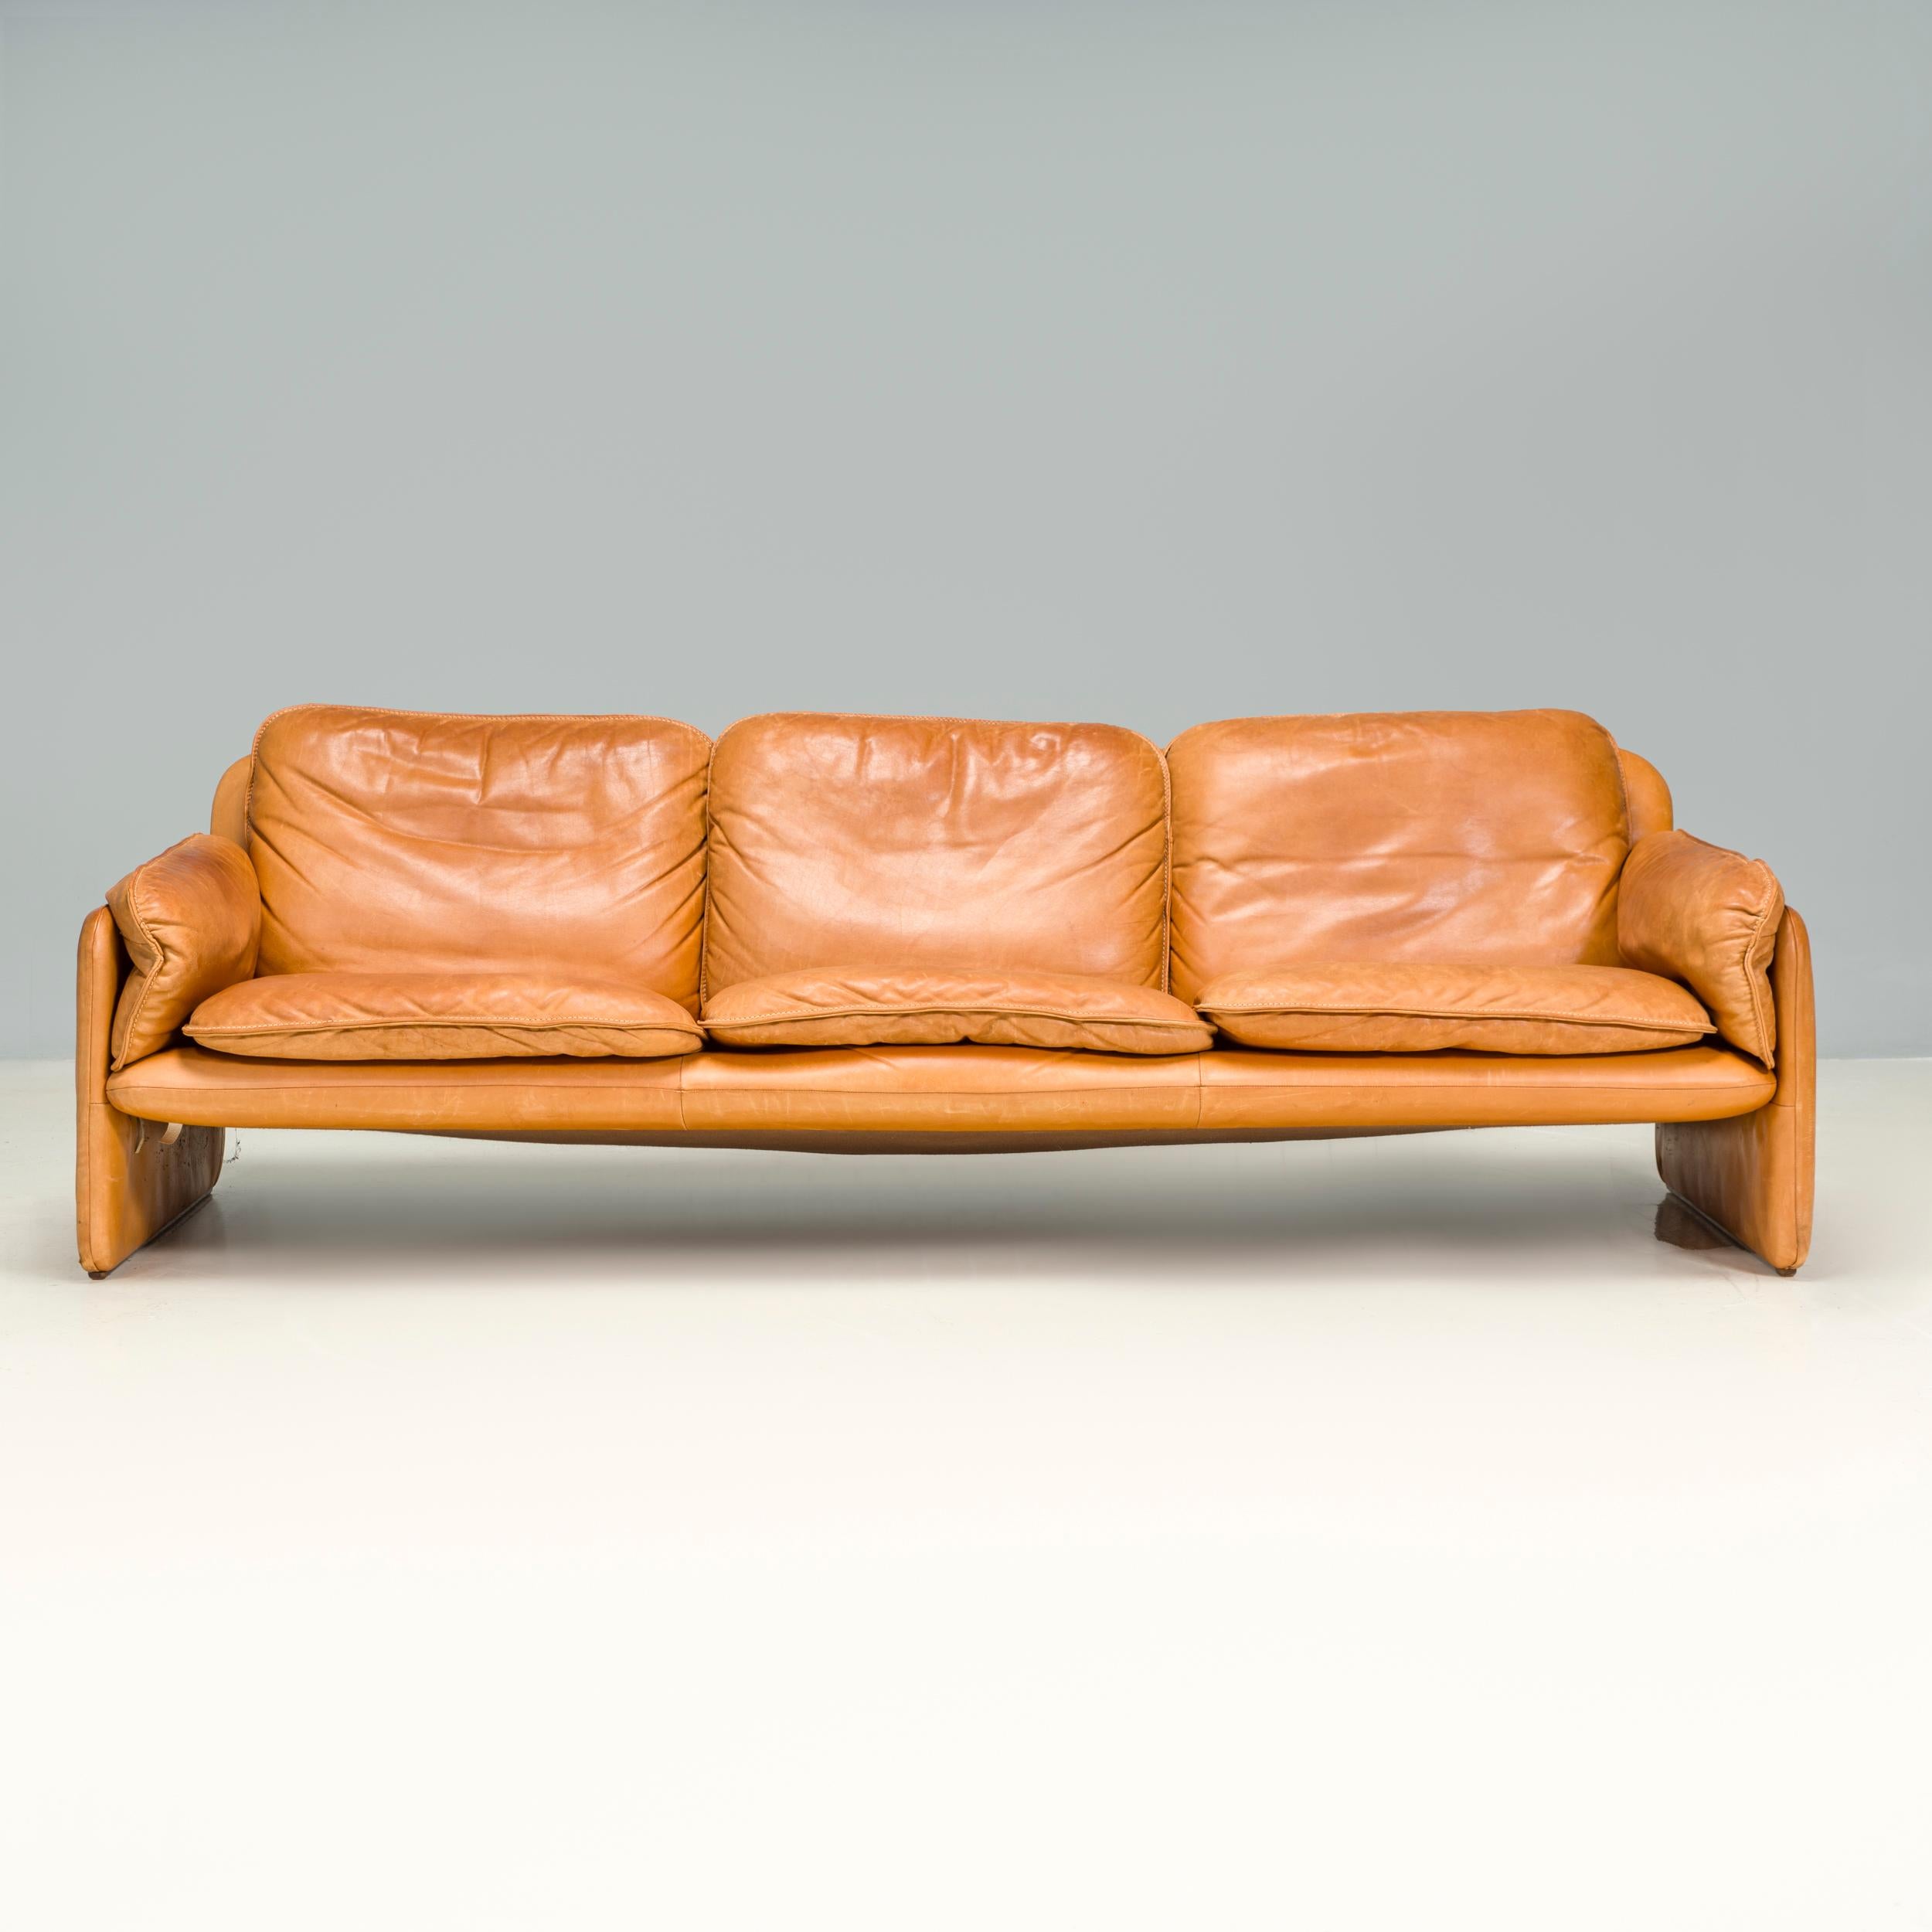 An iconic mid century design, the De Sede DS-61 is no longer in production making it a collectible piece from the furniture manufacturer.

Fully upholstered in soft cedar coloured leather, this three seat sofa features a slimline frame with curved